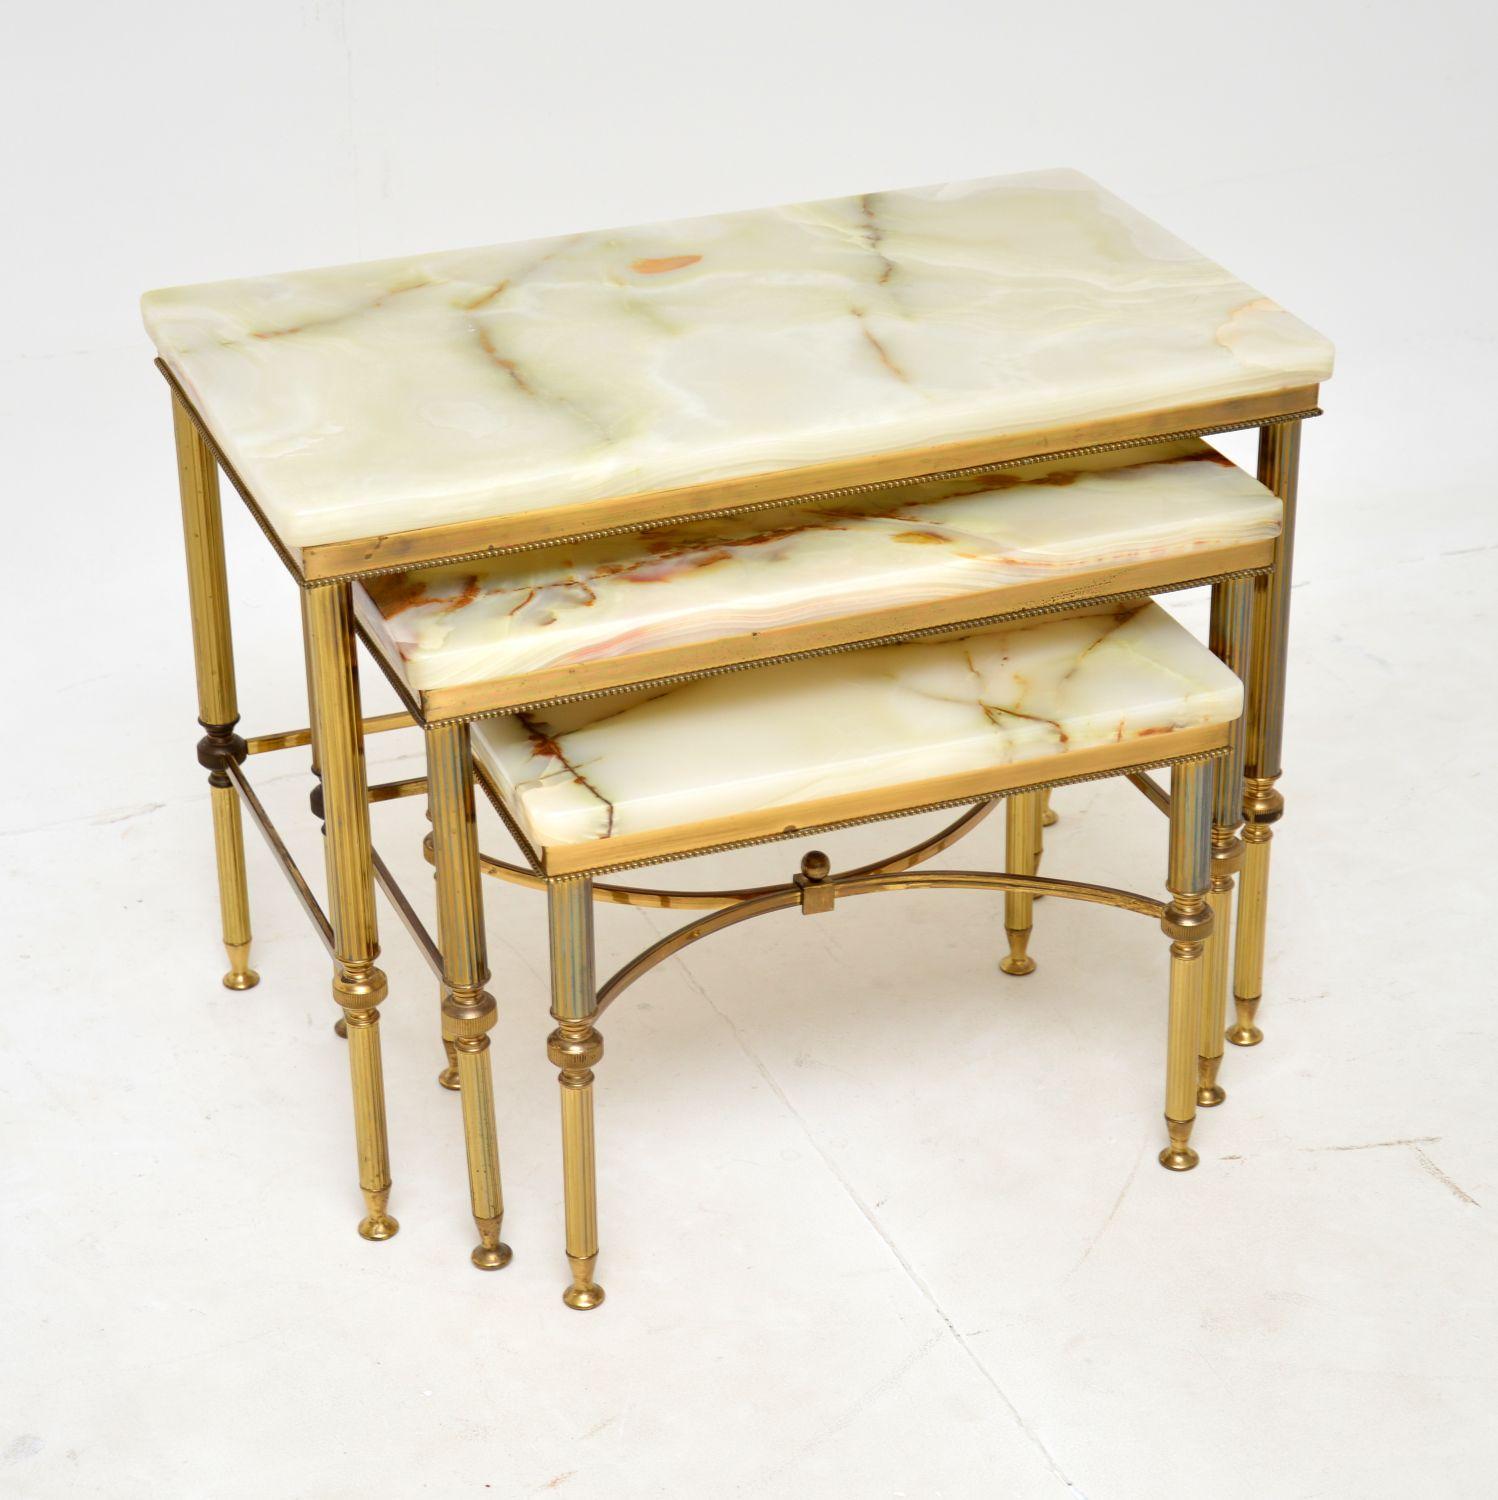 A stunning and extremely well made vintage nest of tables in solid brass with onyx tops. They were made in France, and date from around the 1950’s.

The quality is outstanding, the onyx tops have a beautiful colour tone and are attached to the brass